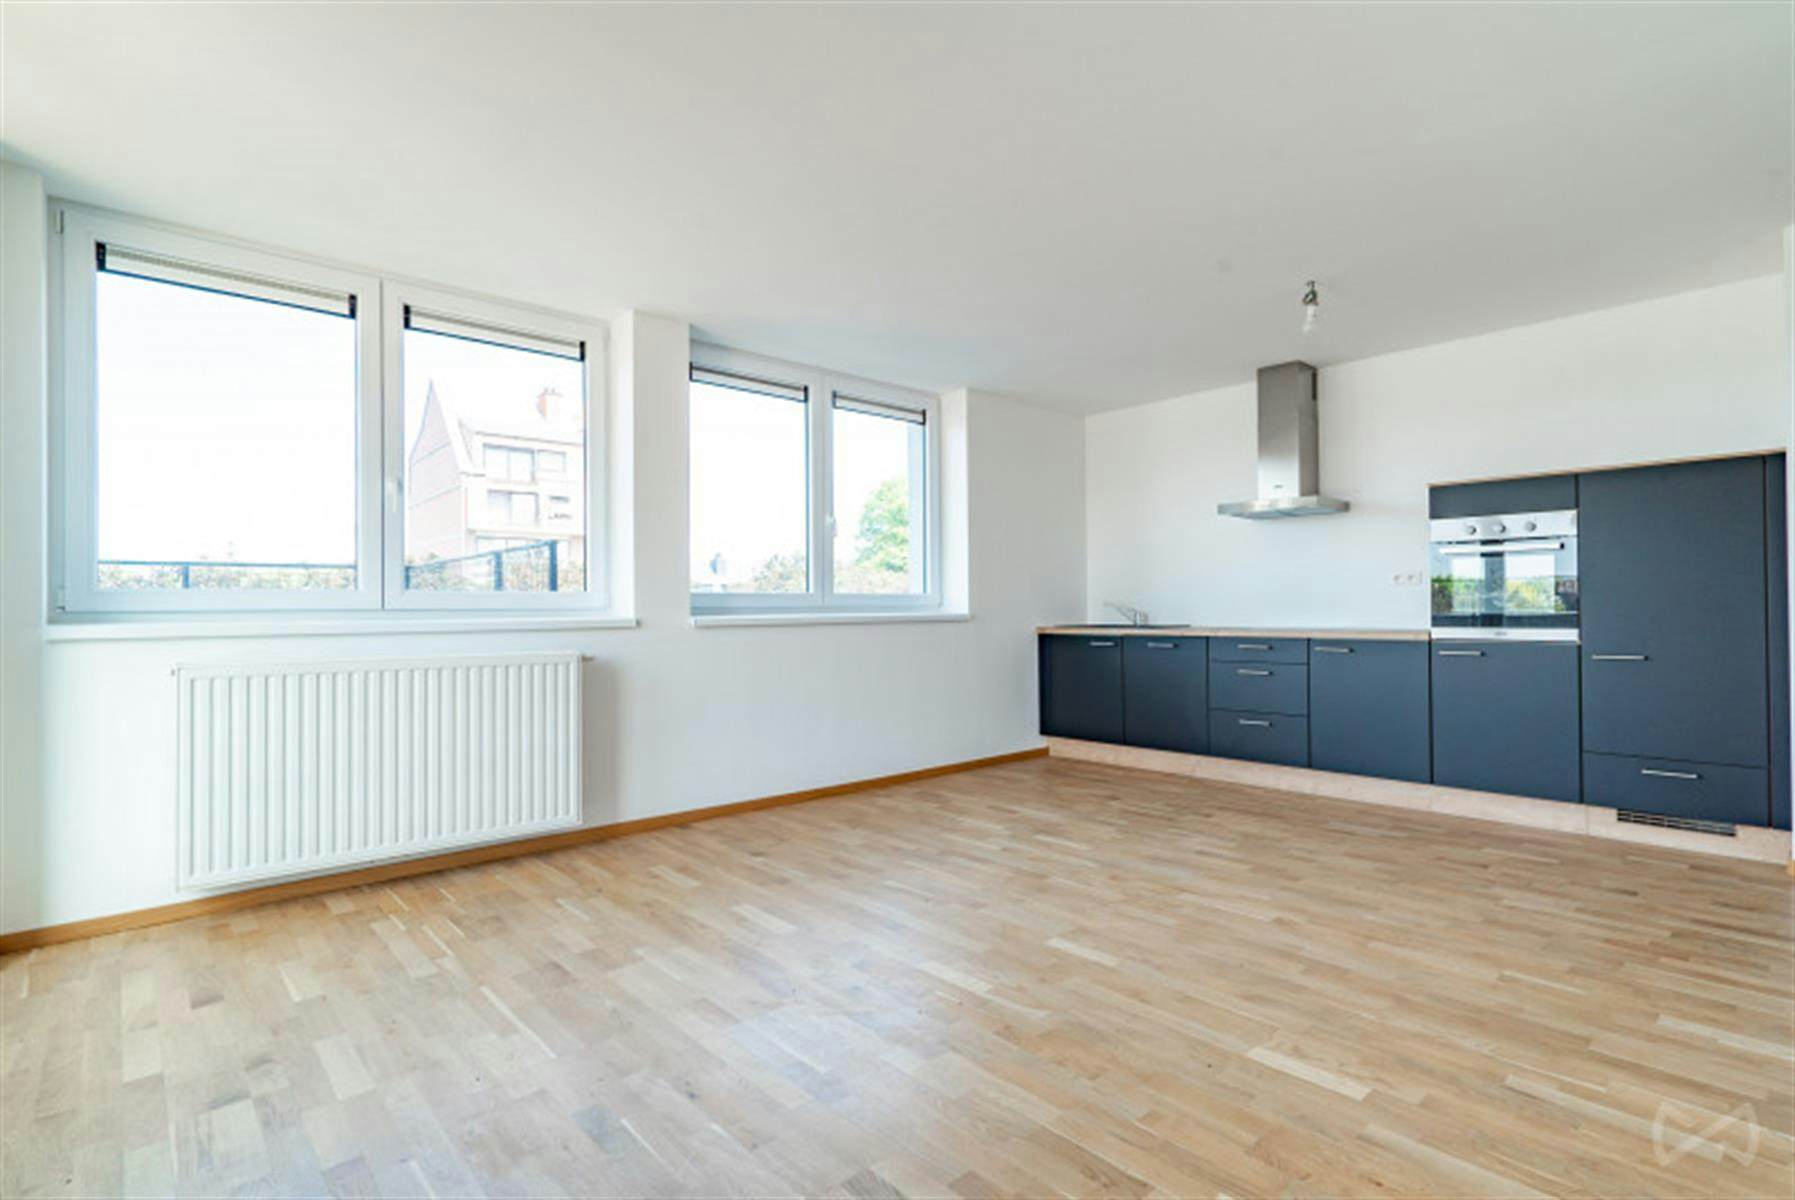 Picture 3 of 4 for Flat with two bedrooms in Mons